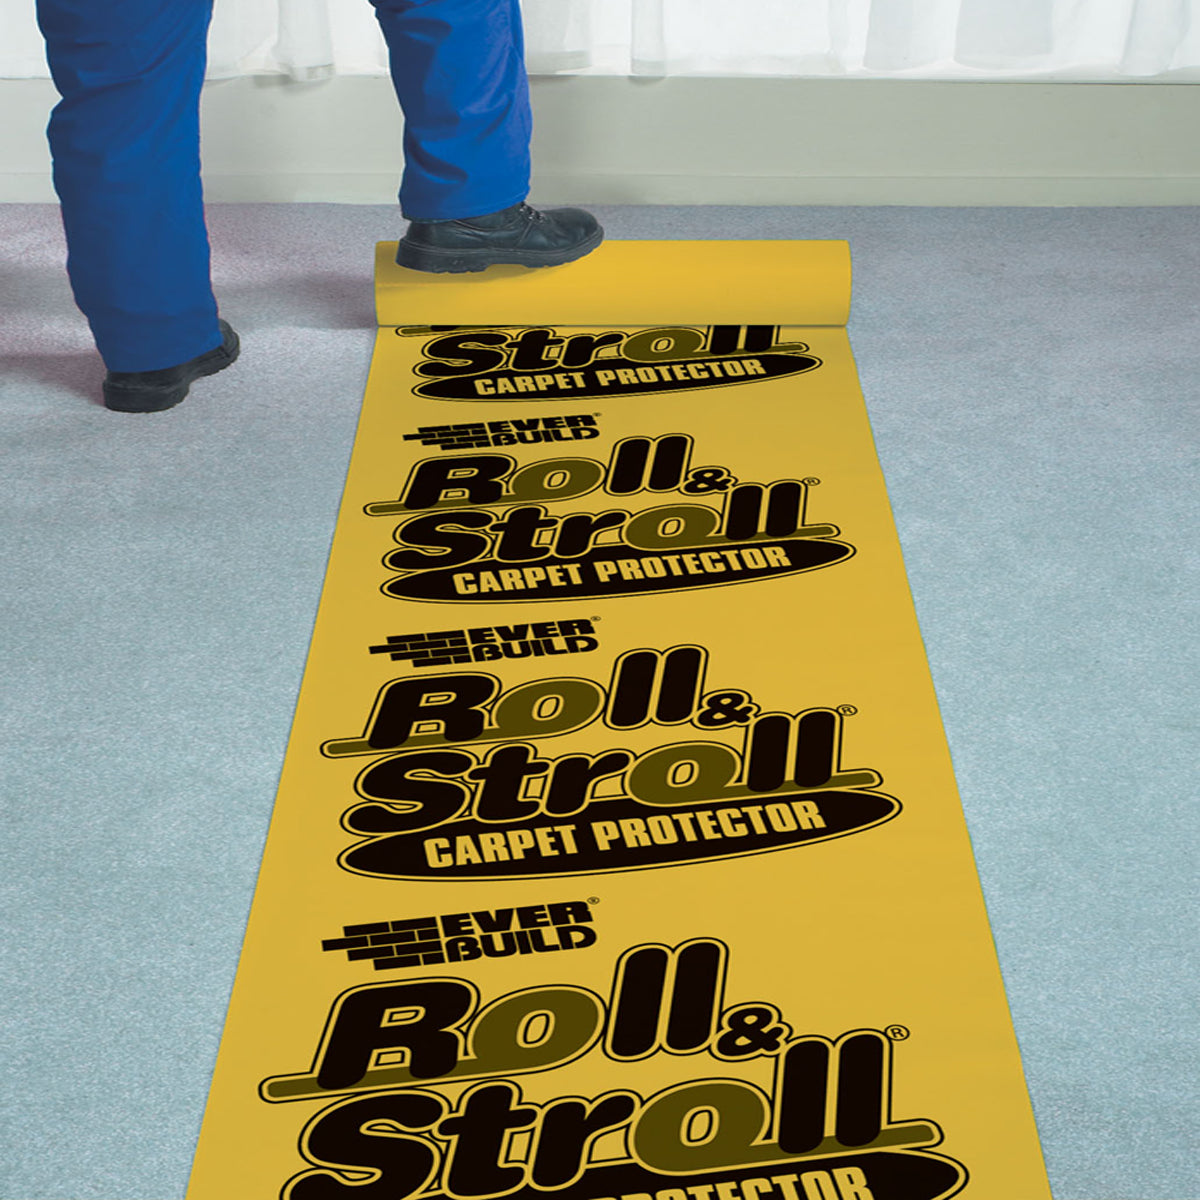 Everbuild Roll & Stroll 600mm x 25m Carpet Floor Protection Film Dust Protector